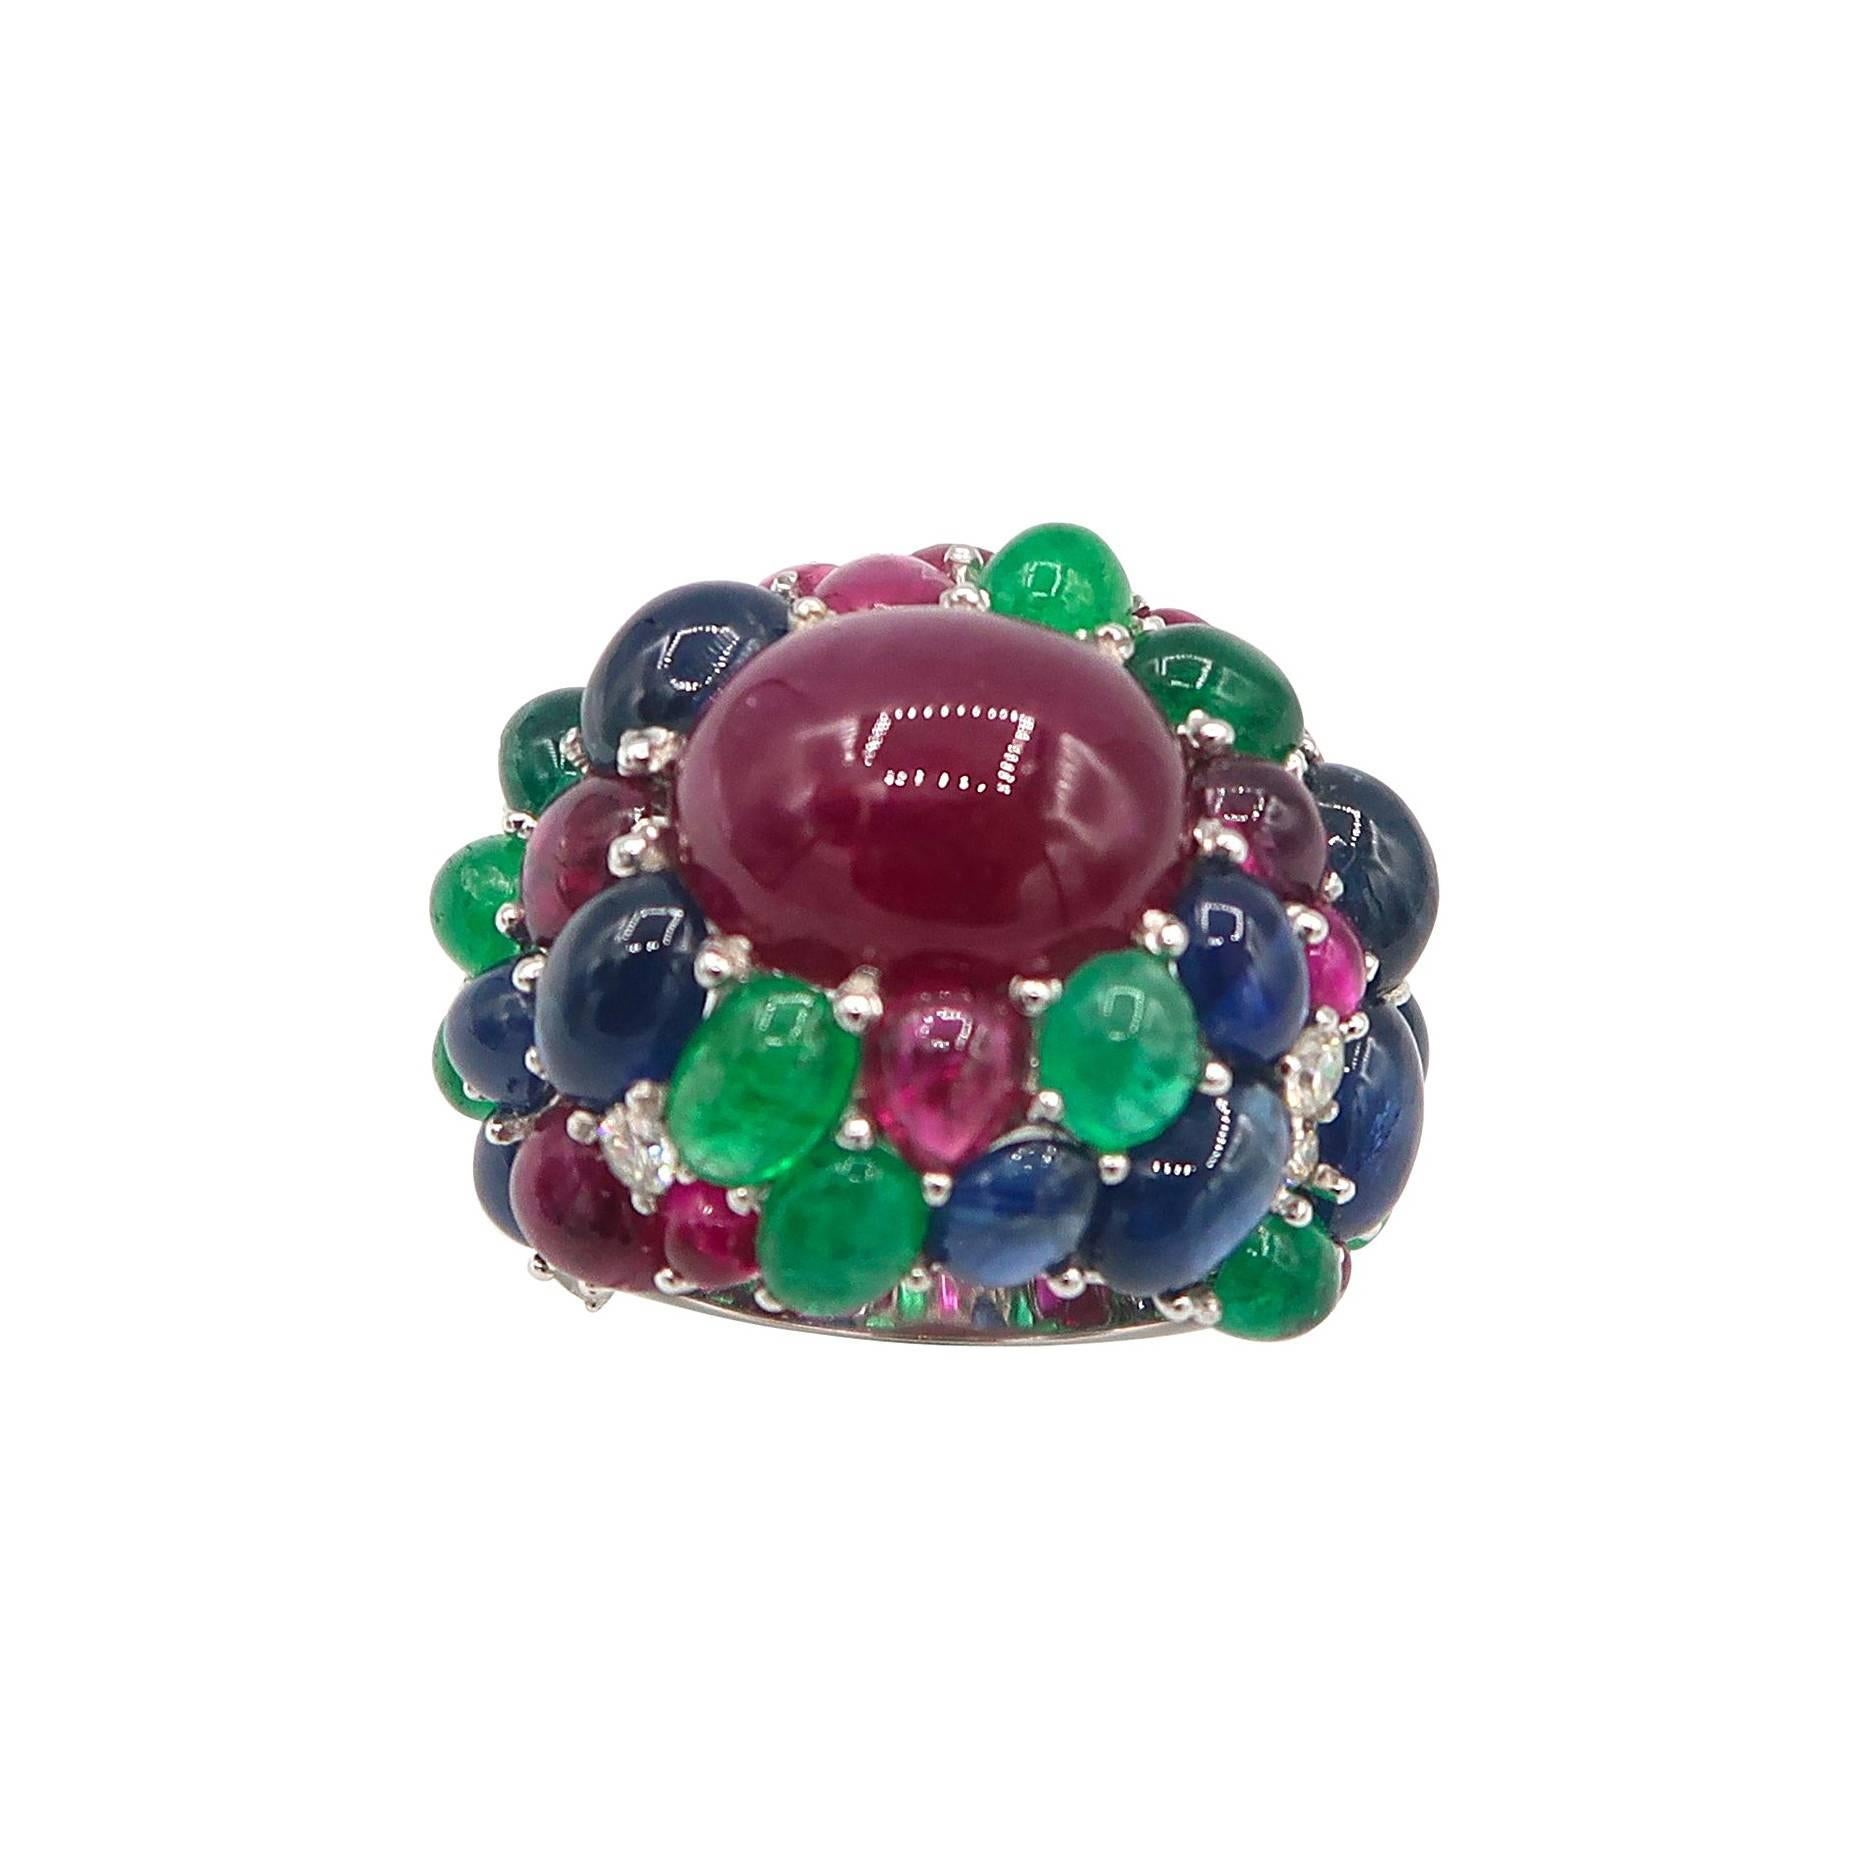 Clustered 39.39 Carat Cabochon Ruby Emerald Sapphire Diamond 18 Karat Gold Ring For Sale